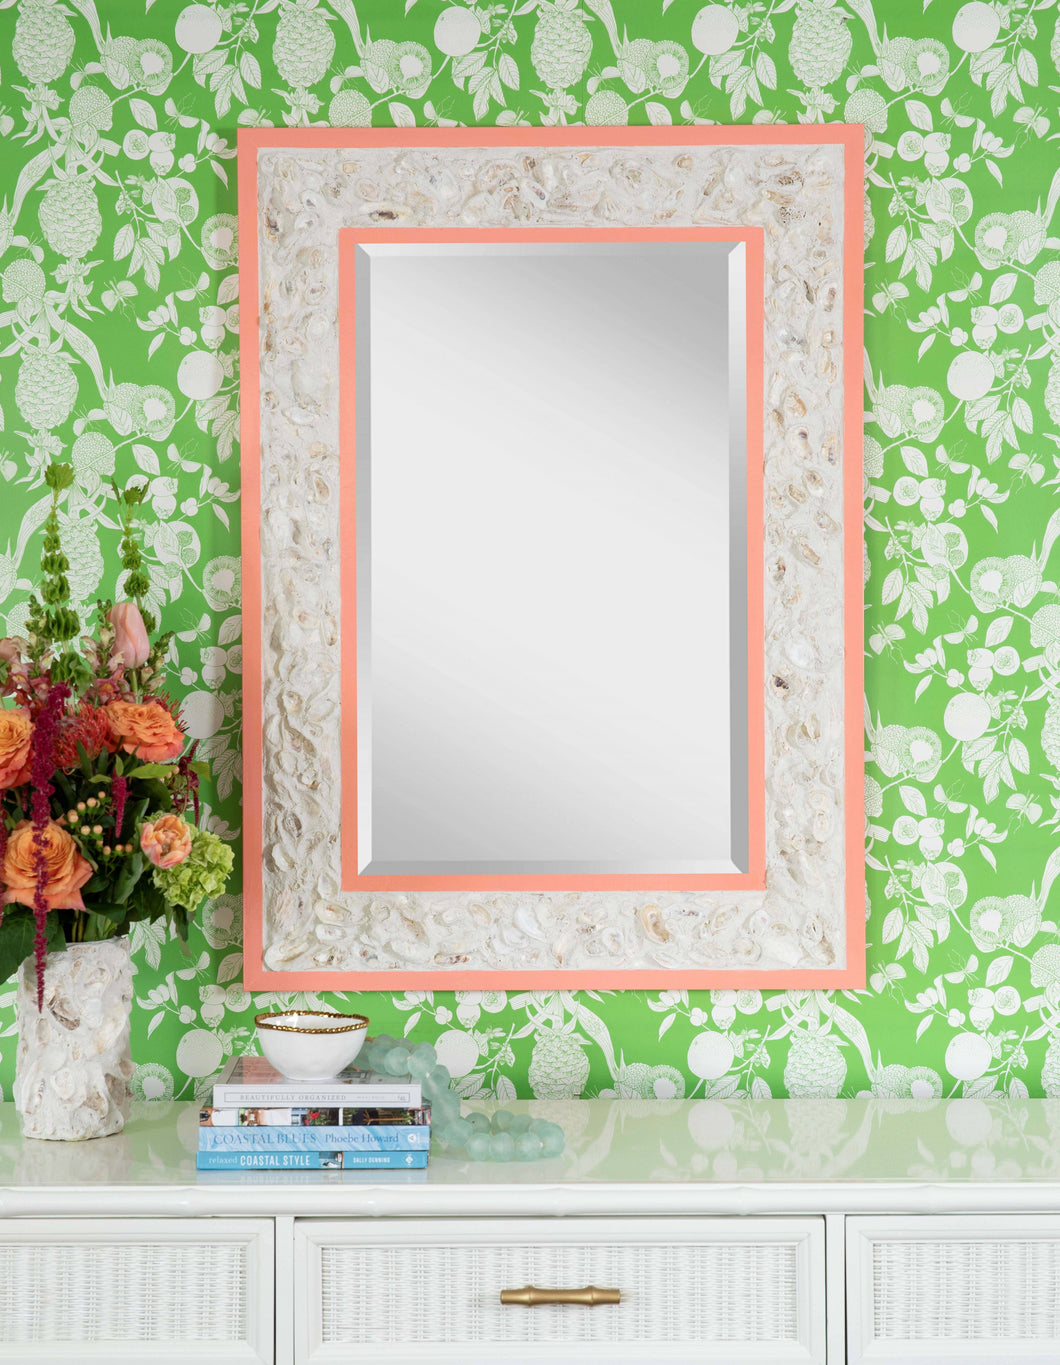 Custom Lacquer Tabby Oyster Shell Mirror | Oyster Shell Decor